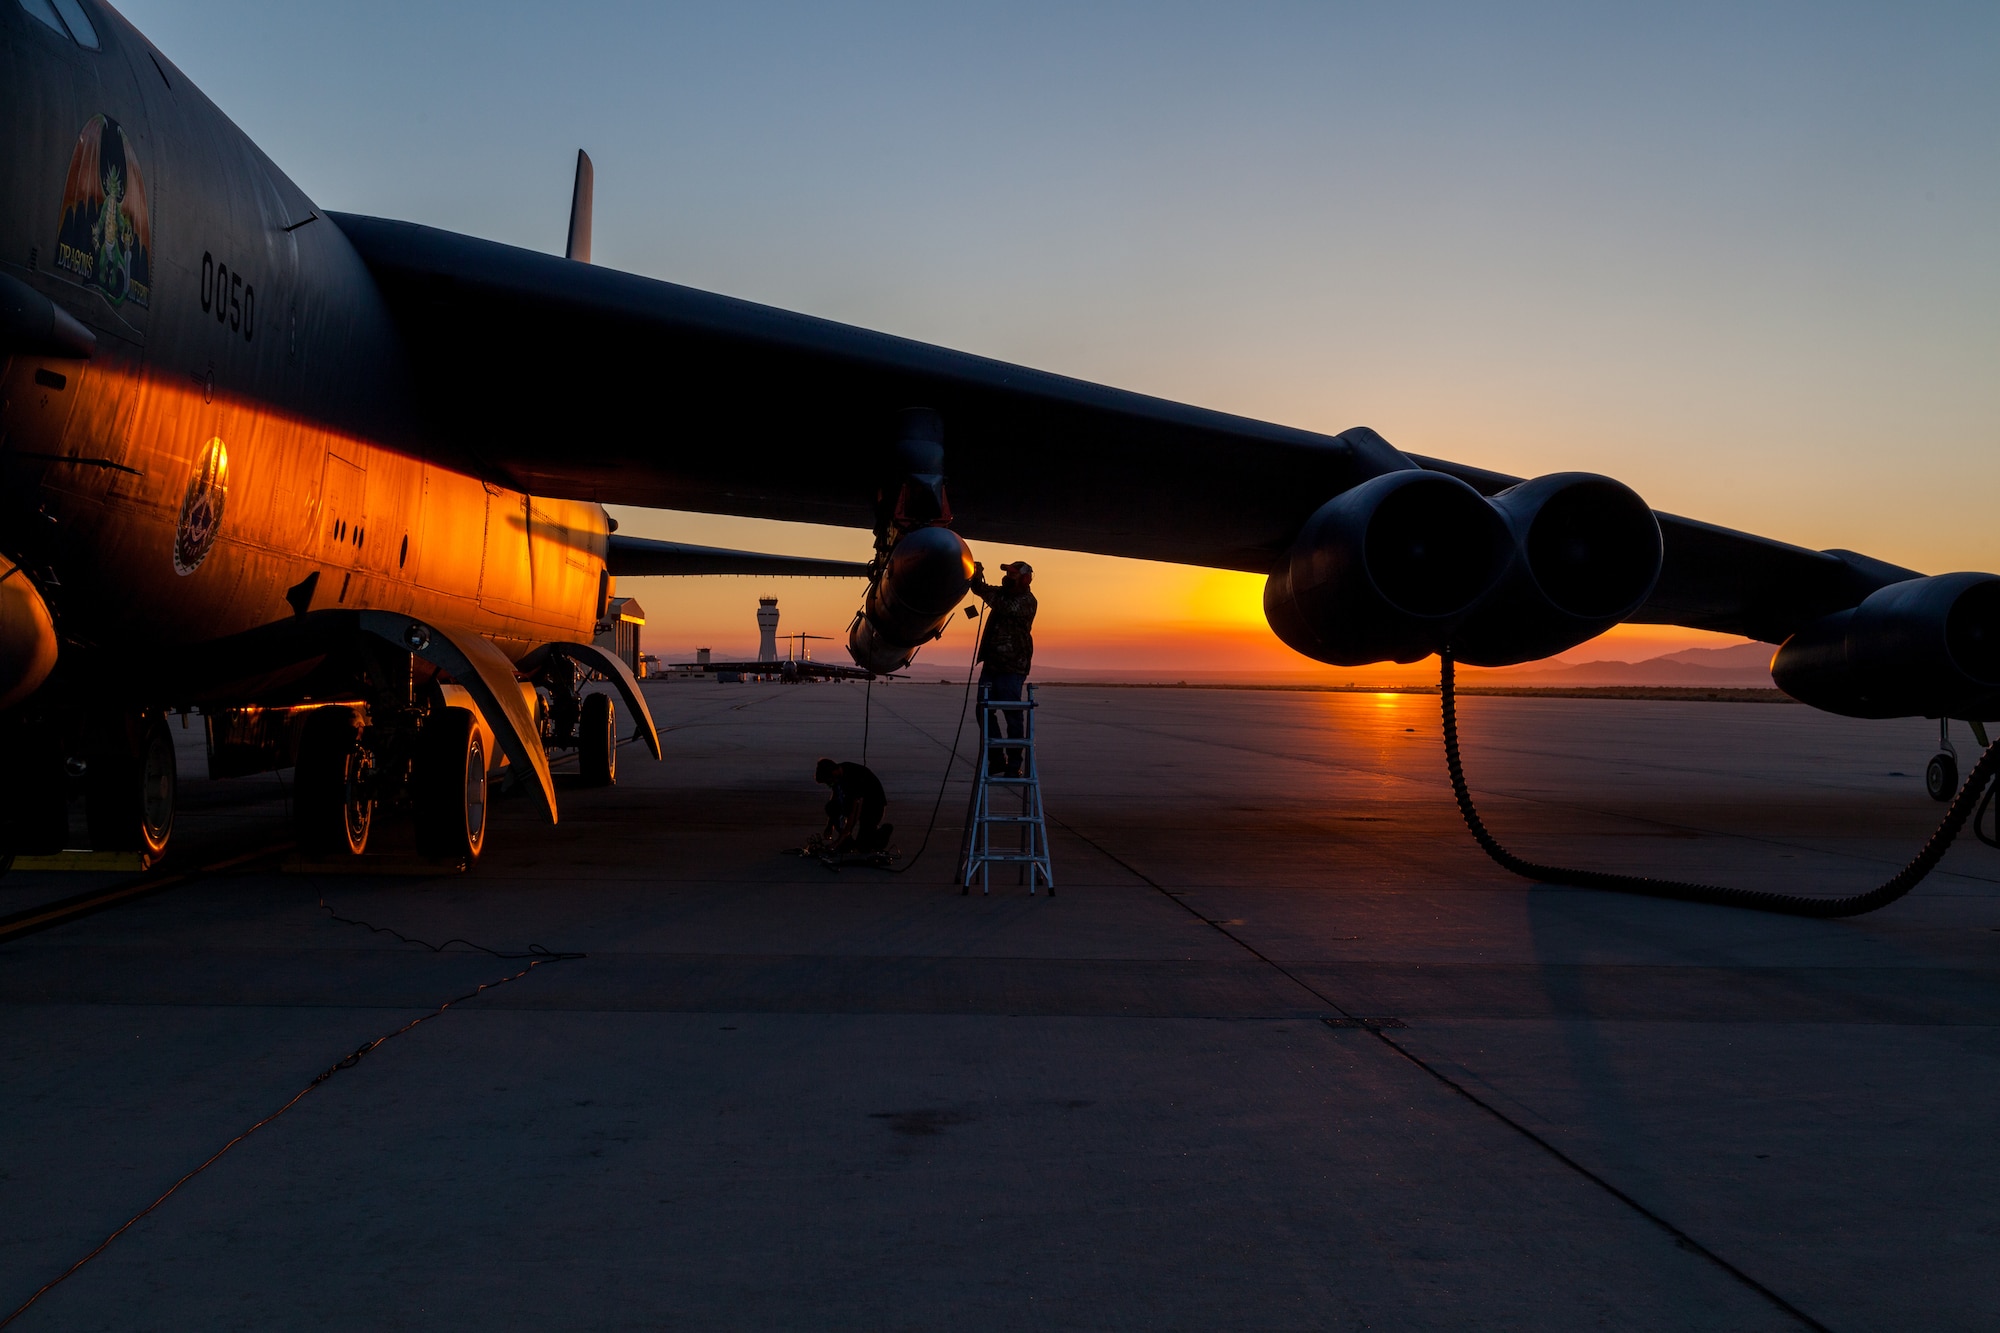 Members of the AGM-183A Air-launched Rapid Response Weapon Instrumented Measurement Vehicle 2 test team make final preparations prior to a captive-carry test flight of the prototype hypersonic weapon at Edwards Air Force Base, California, Aug. 8. (Air Force photo by Kyle Brasier)